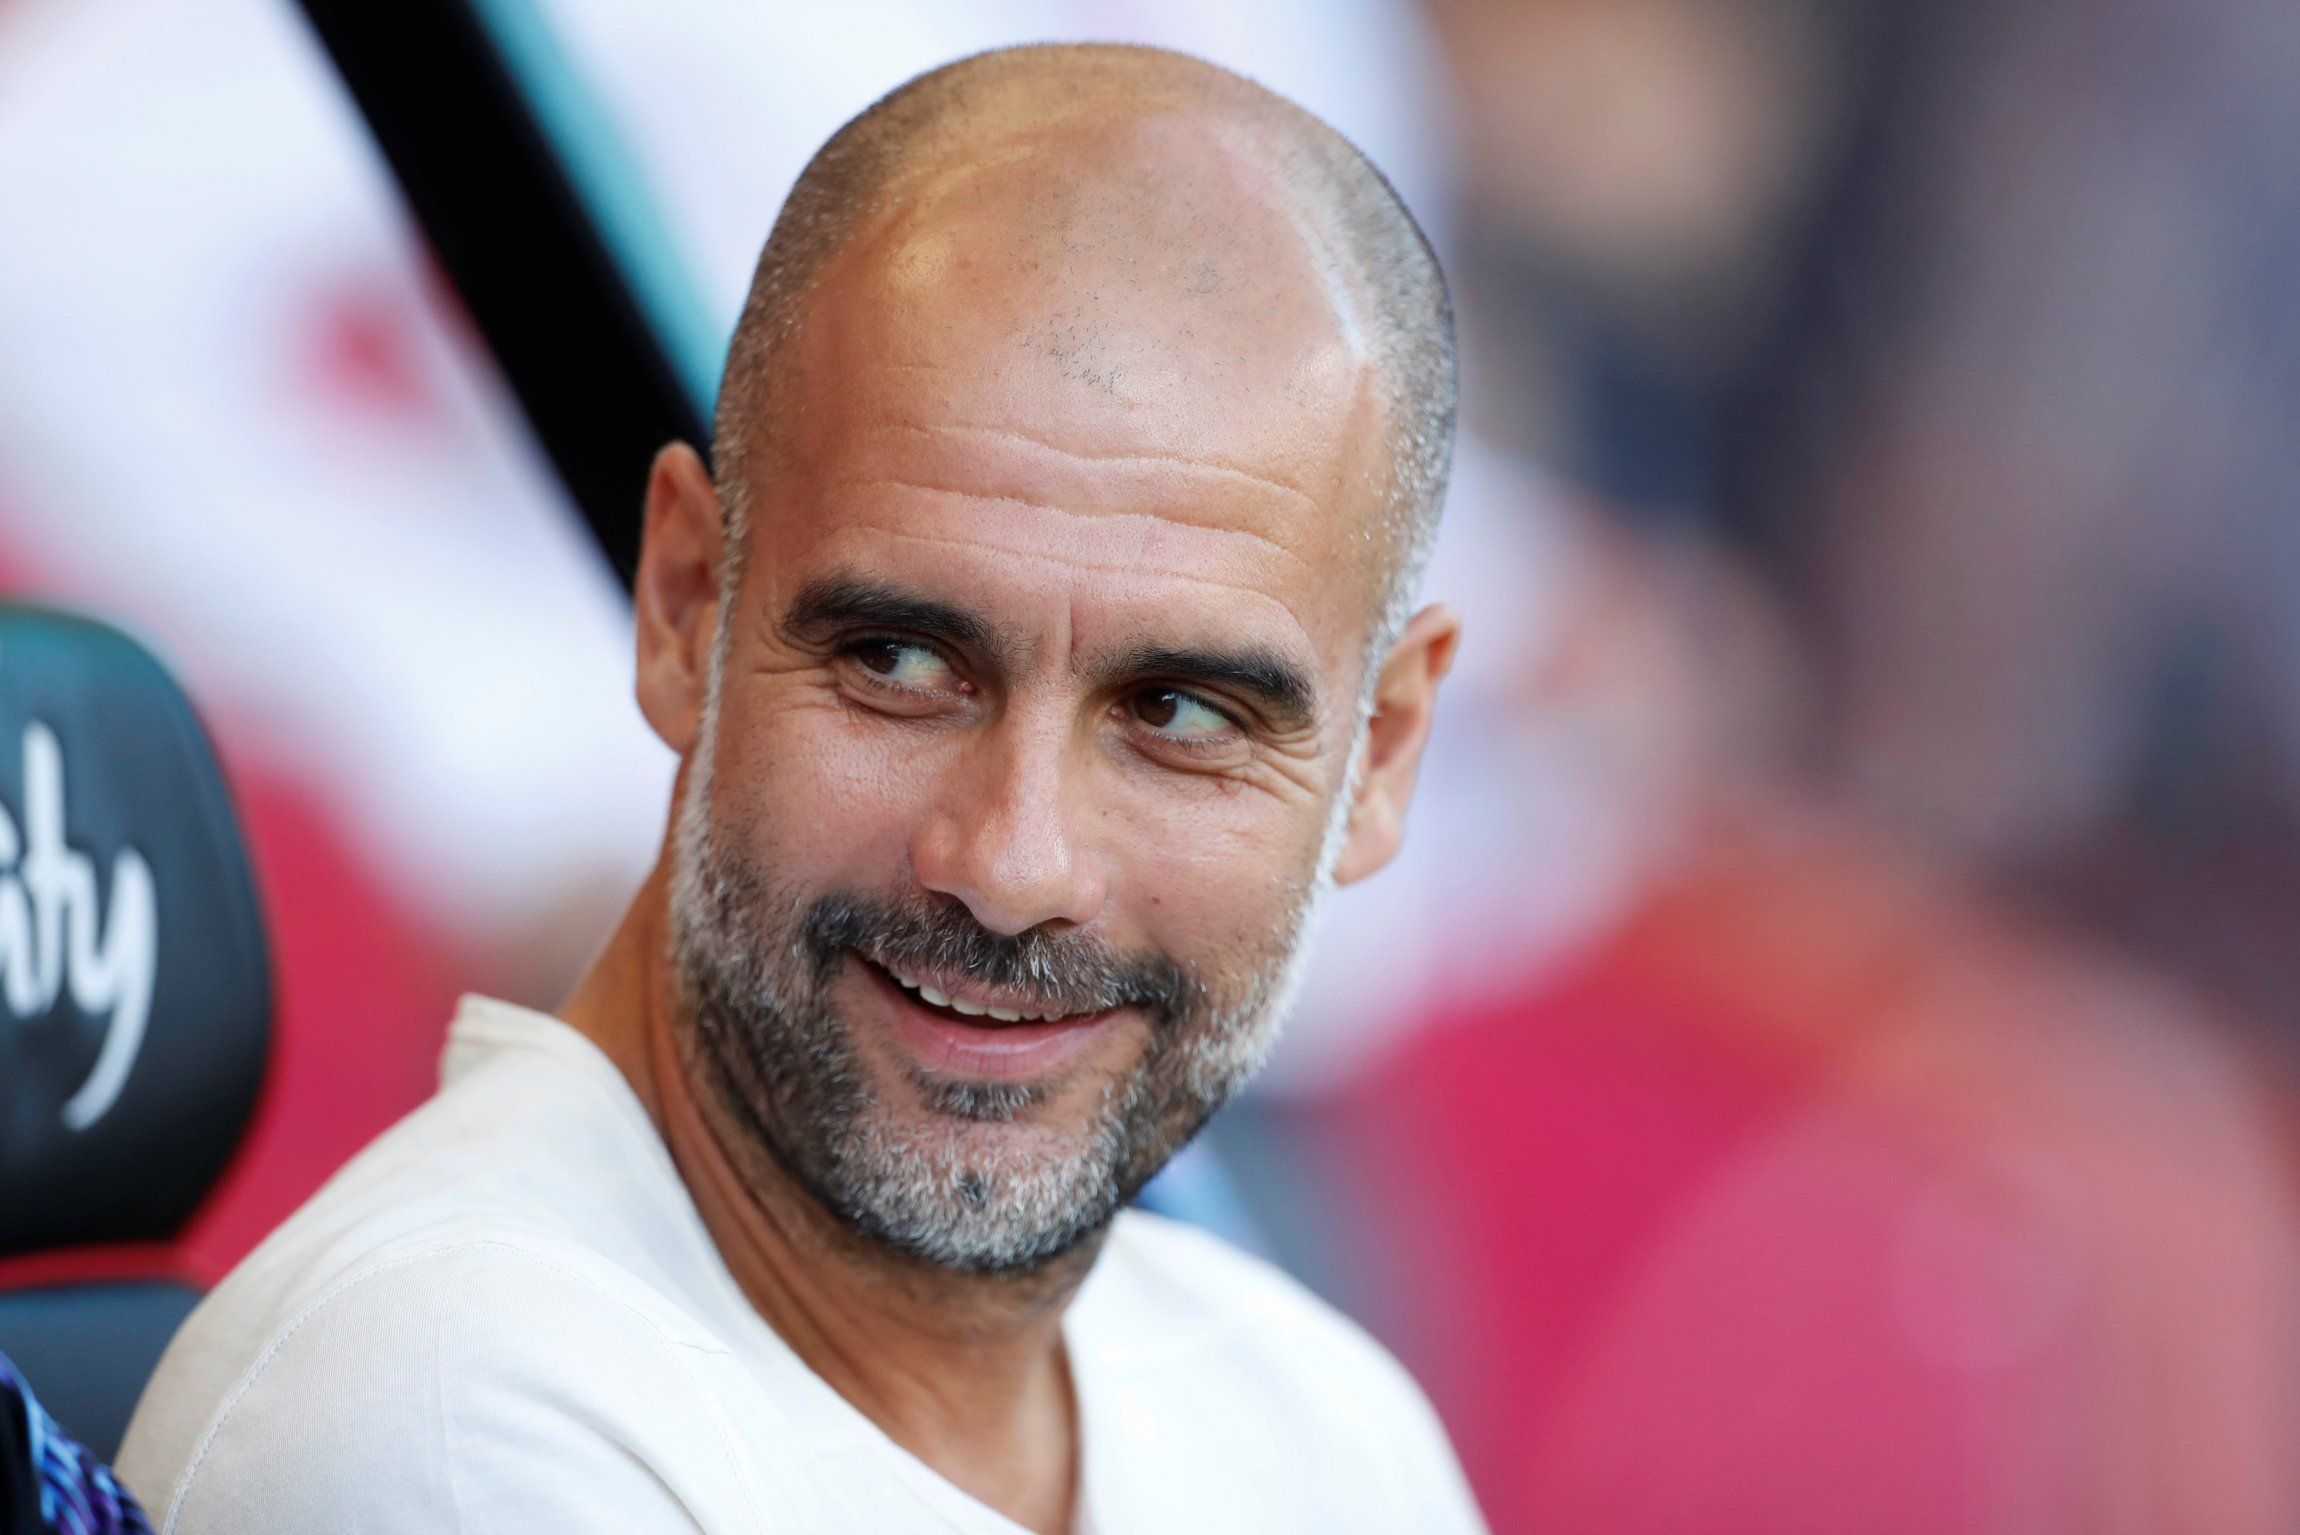 Pep Guardiola smiling before match against Bournemouth